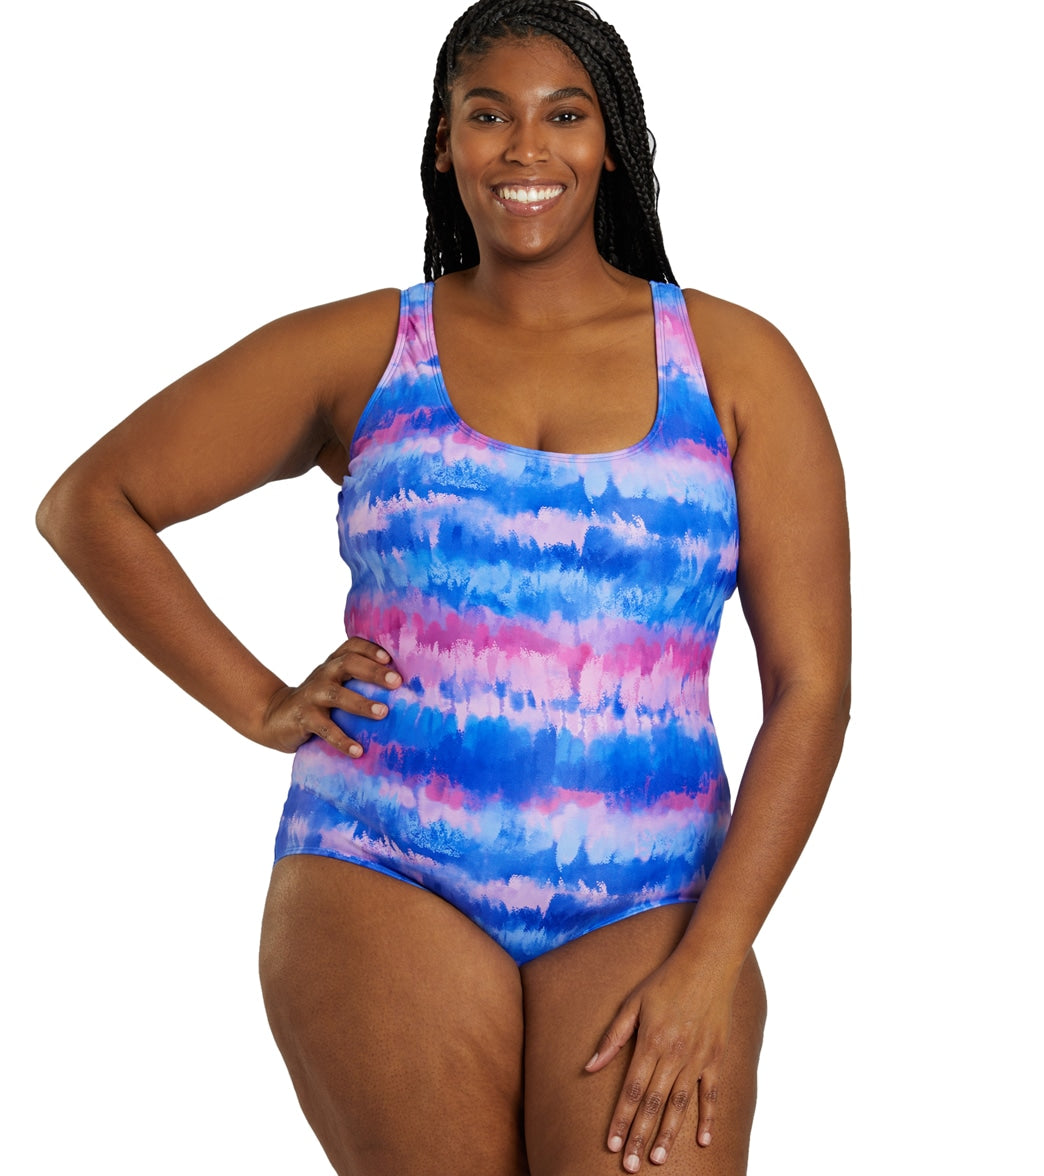 Shop Sales On Women's Bathing Suits, Athletic Bikinis, One Piece Swimsuits  & Activewear – JOLYN